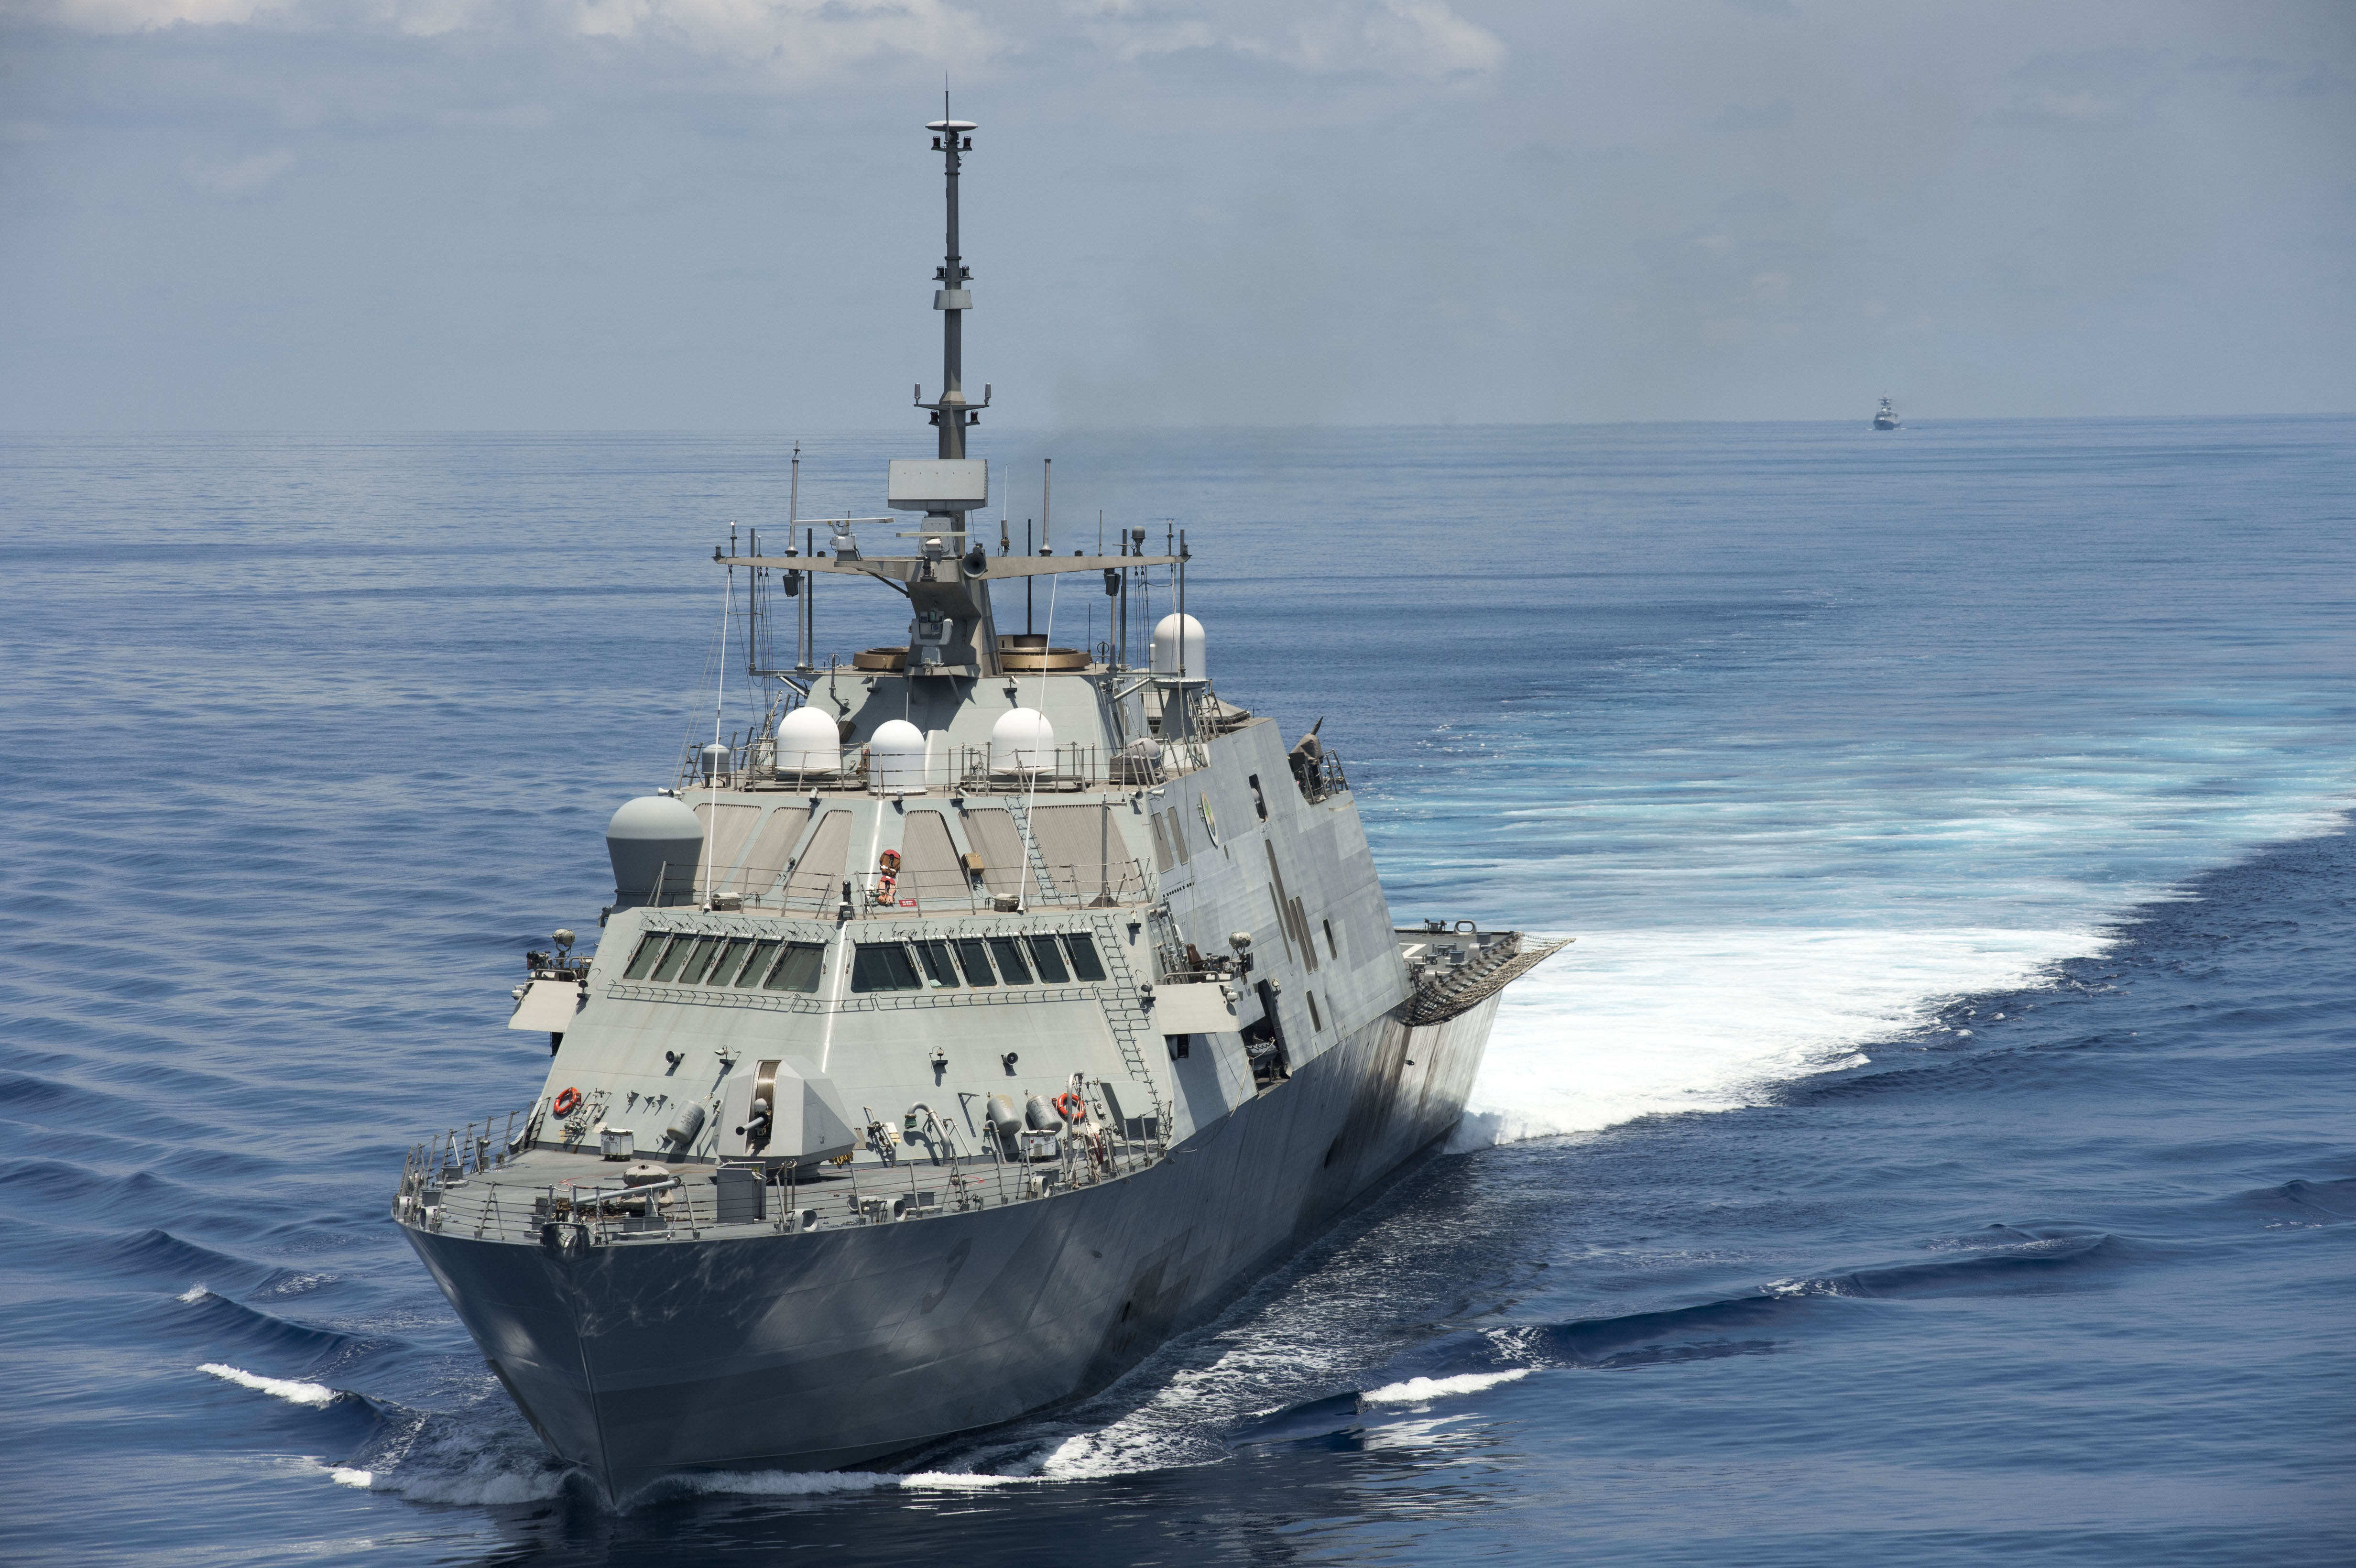 The littoral combat ship USS Fort Worth (LCS 3) conducts patrols in international waters of the South China Sea near the Spratly Islands as the People's Liberation Army-Navy [PLA(N)] guided-missile frigate Yancheng (FFG 546) transits close behind on May 11, 2015. US Navy photo.